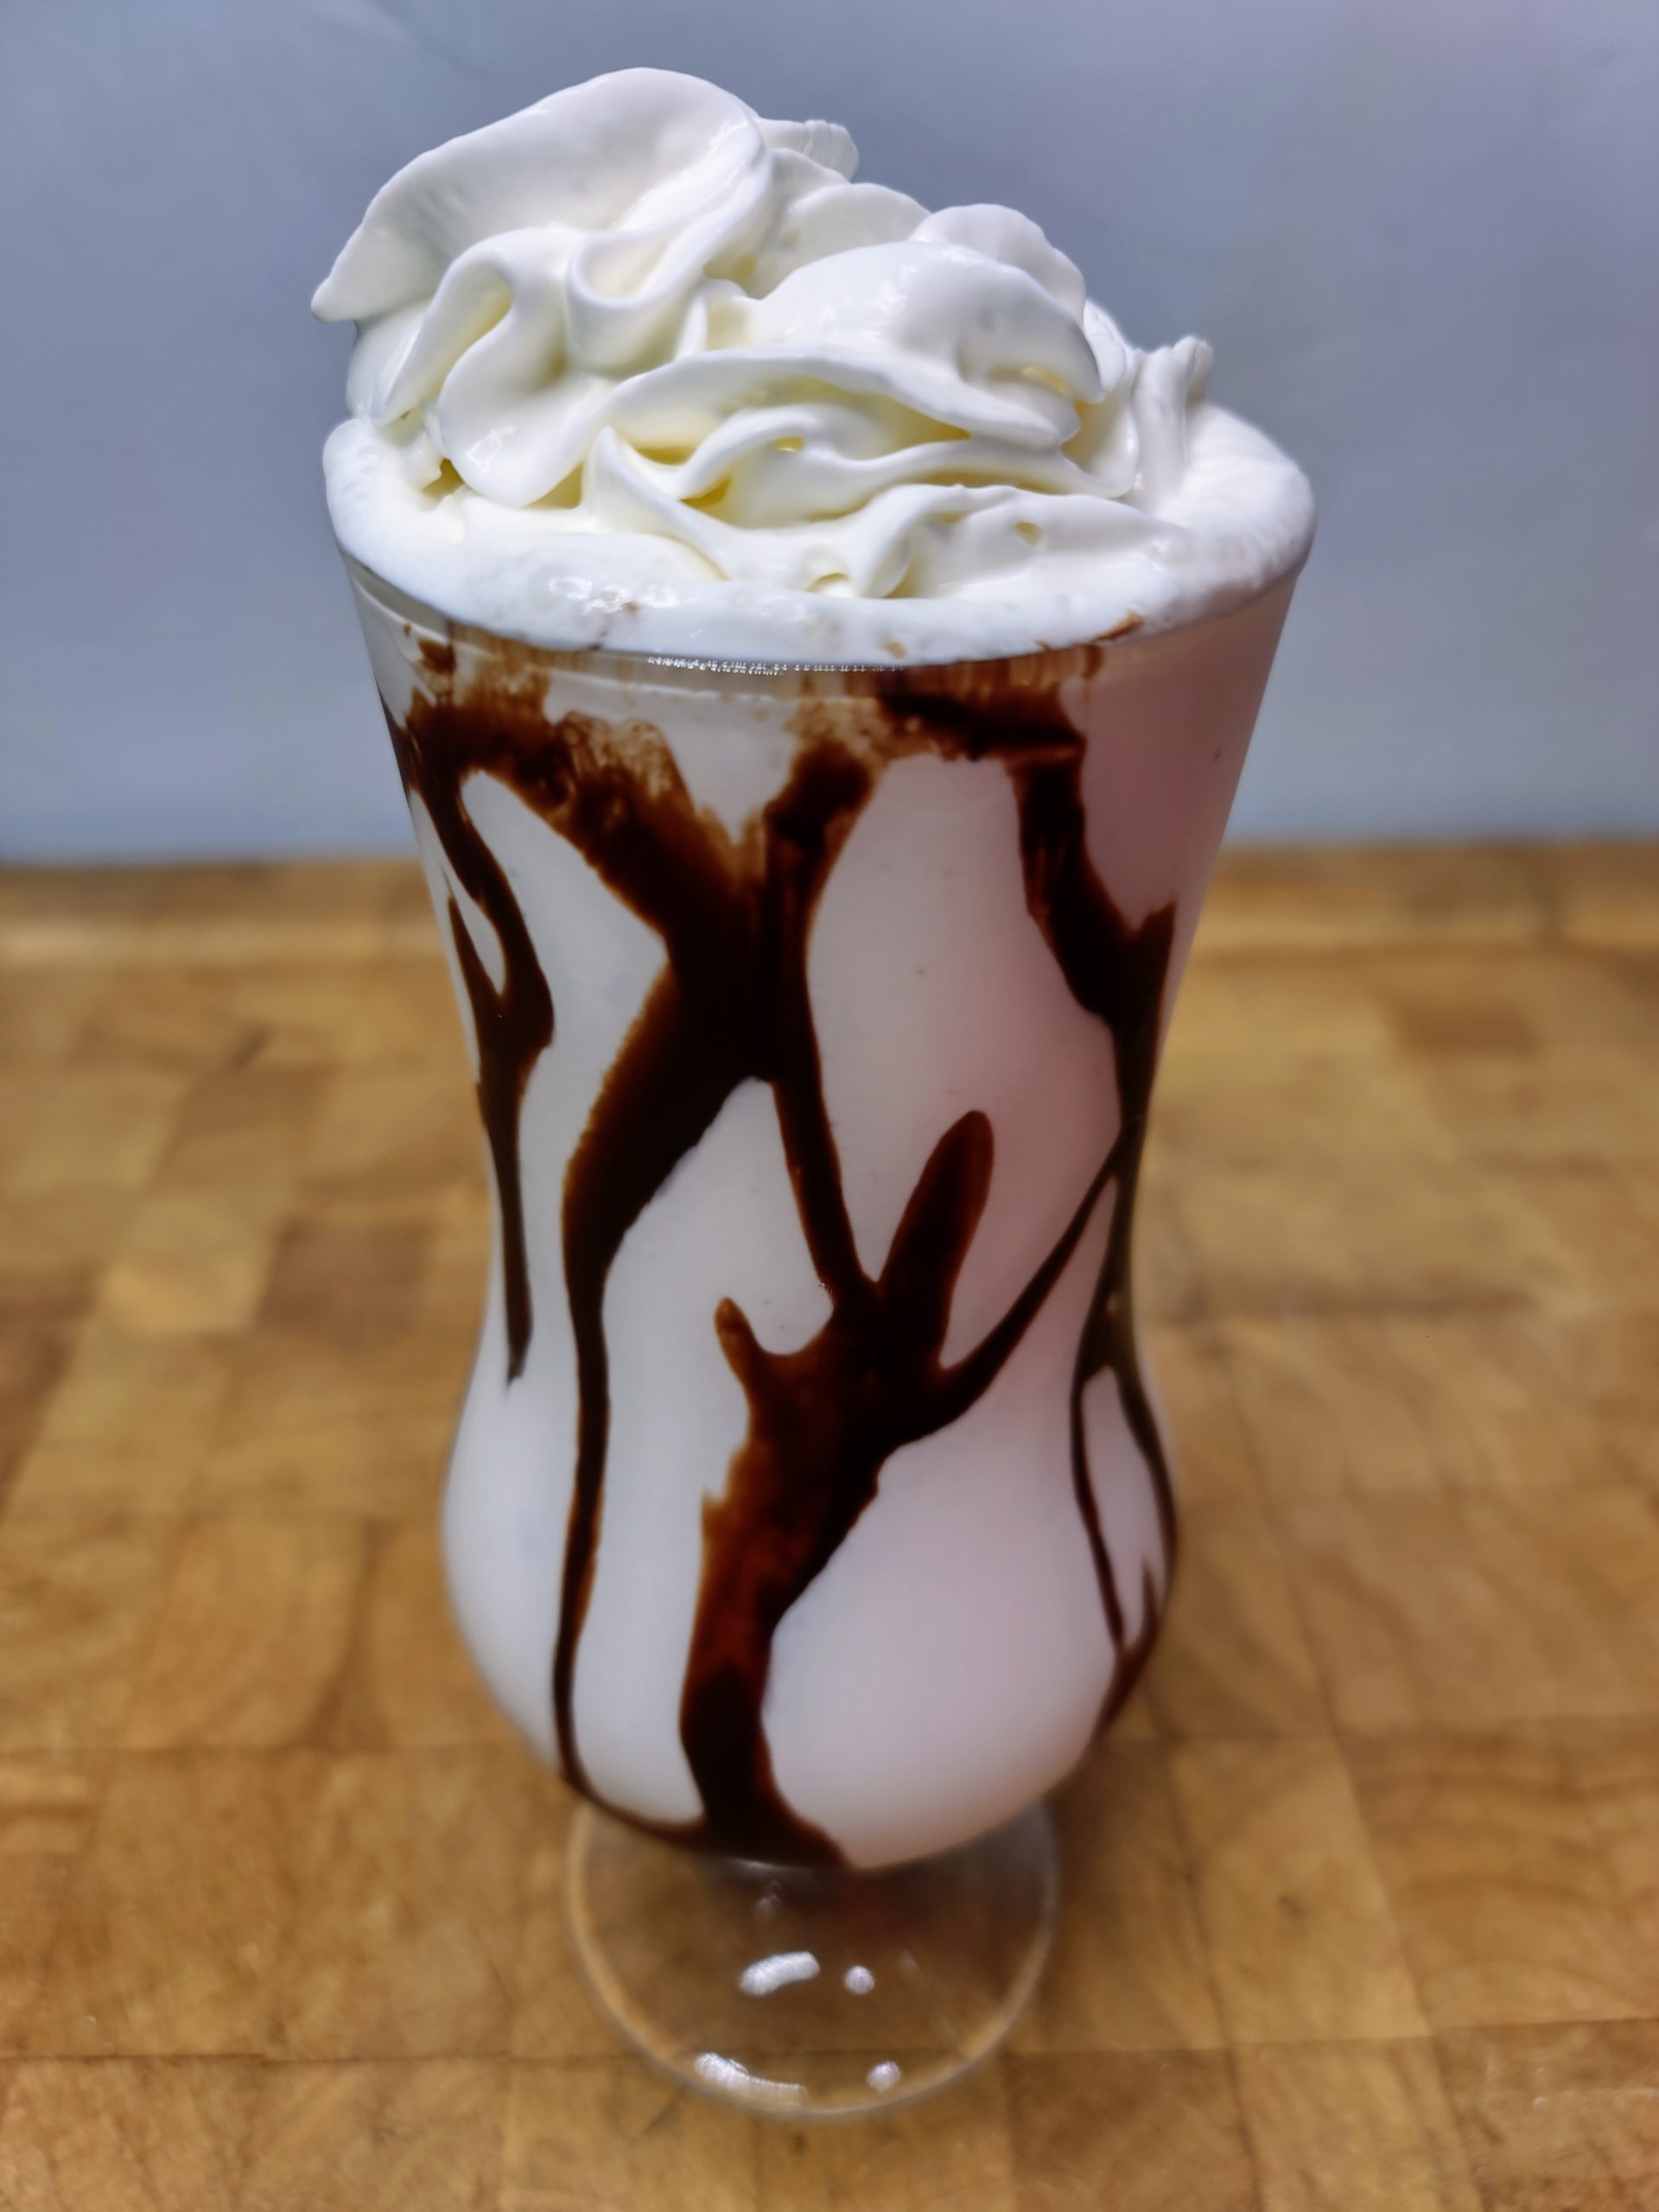 Peanut butter whiskey milkshake with chocolate syrup and whipped cream.